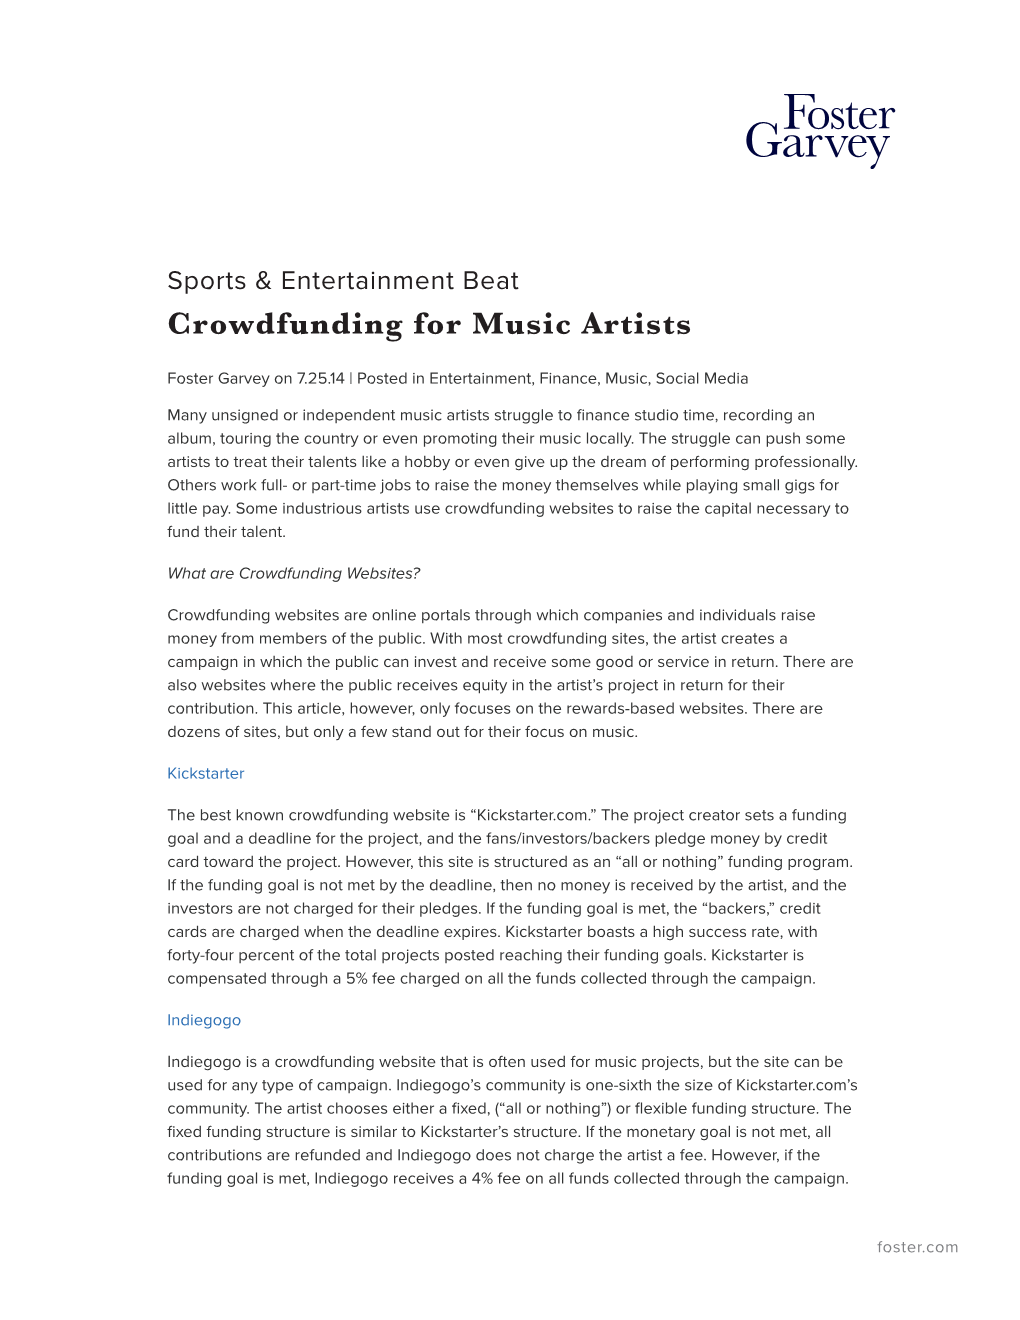 Crowdfunding for Music Artists